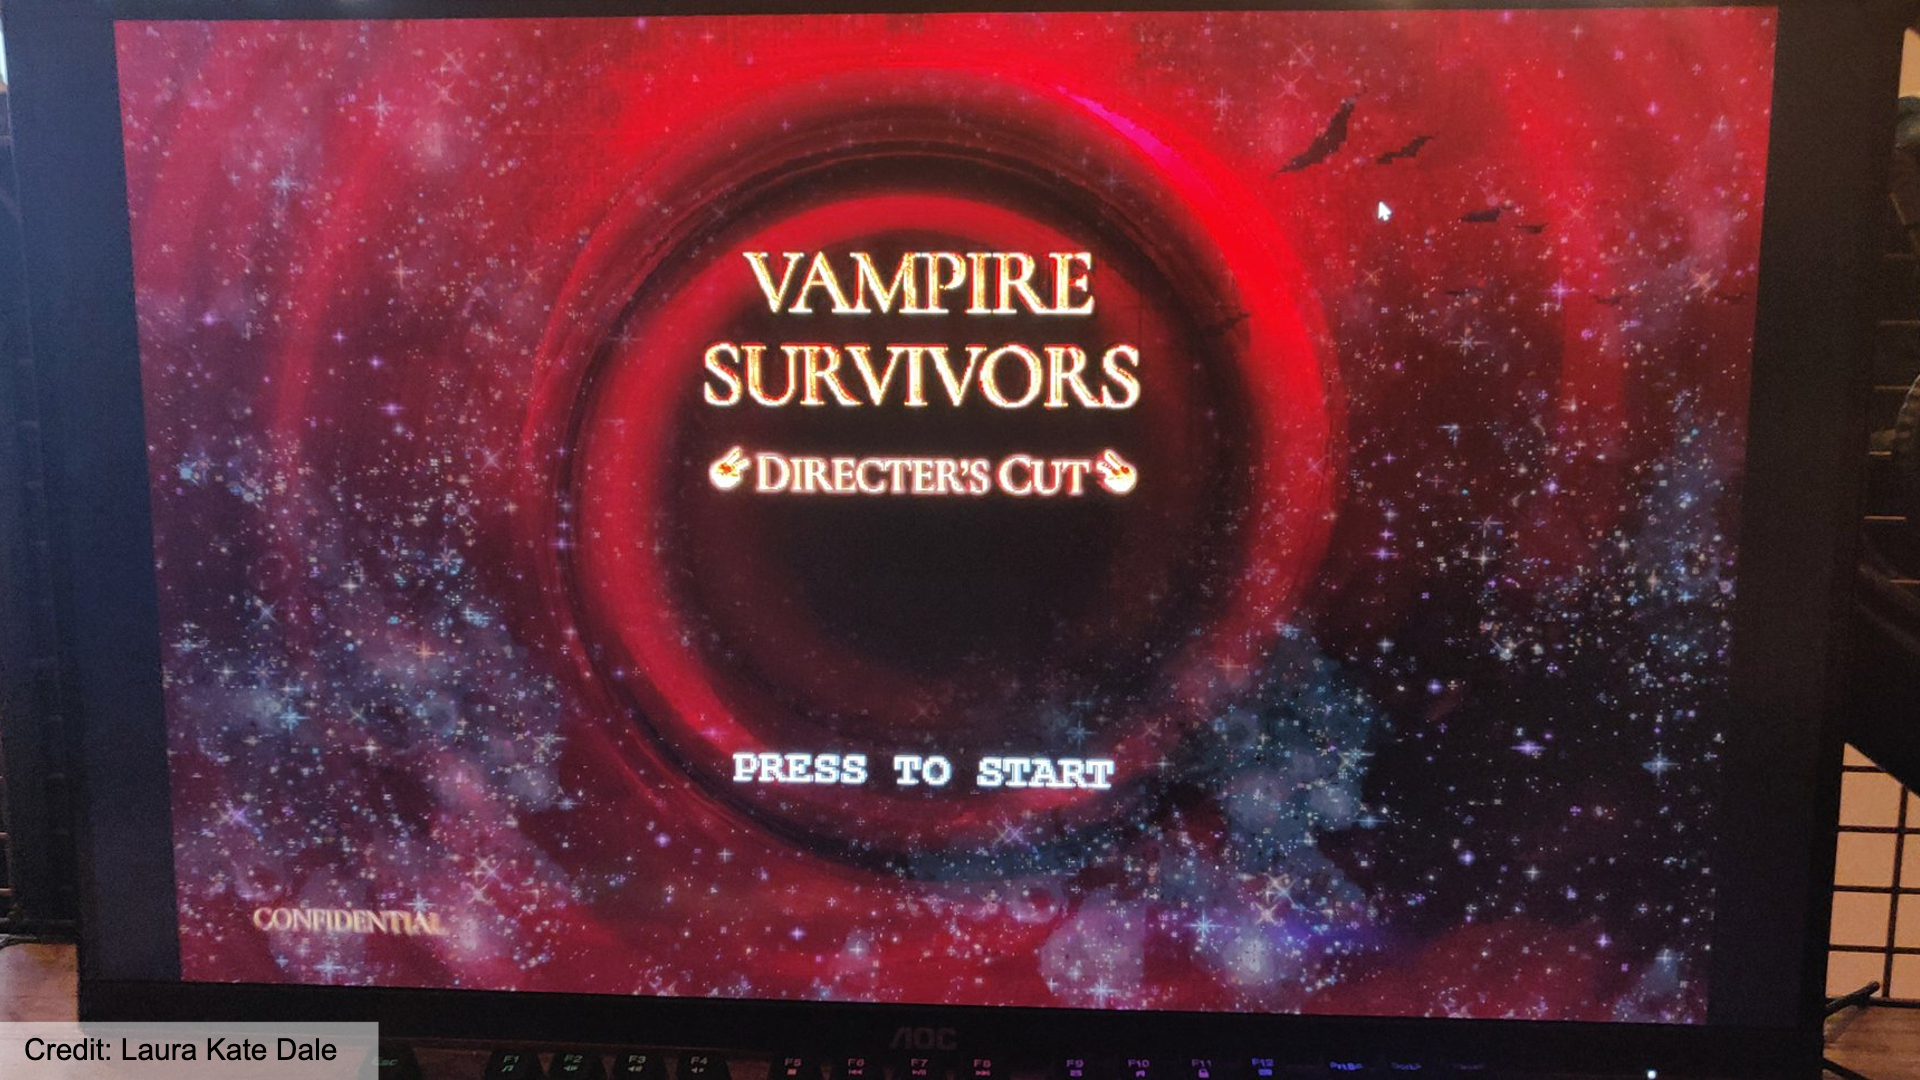 An image showing the alleged Vampire Survivors Director's Cut game menu